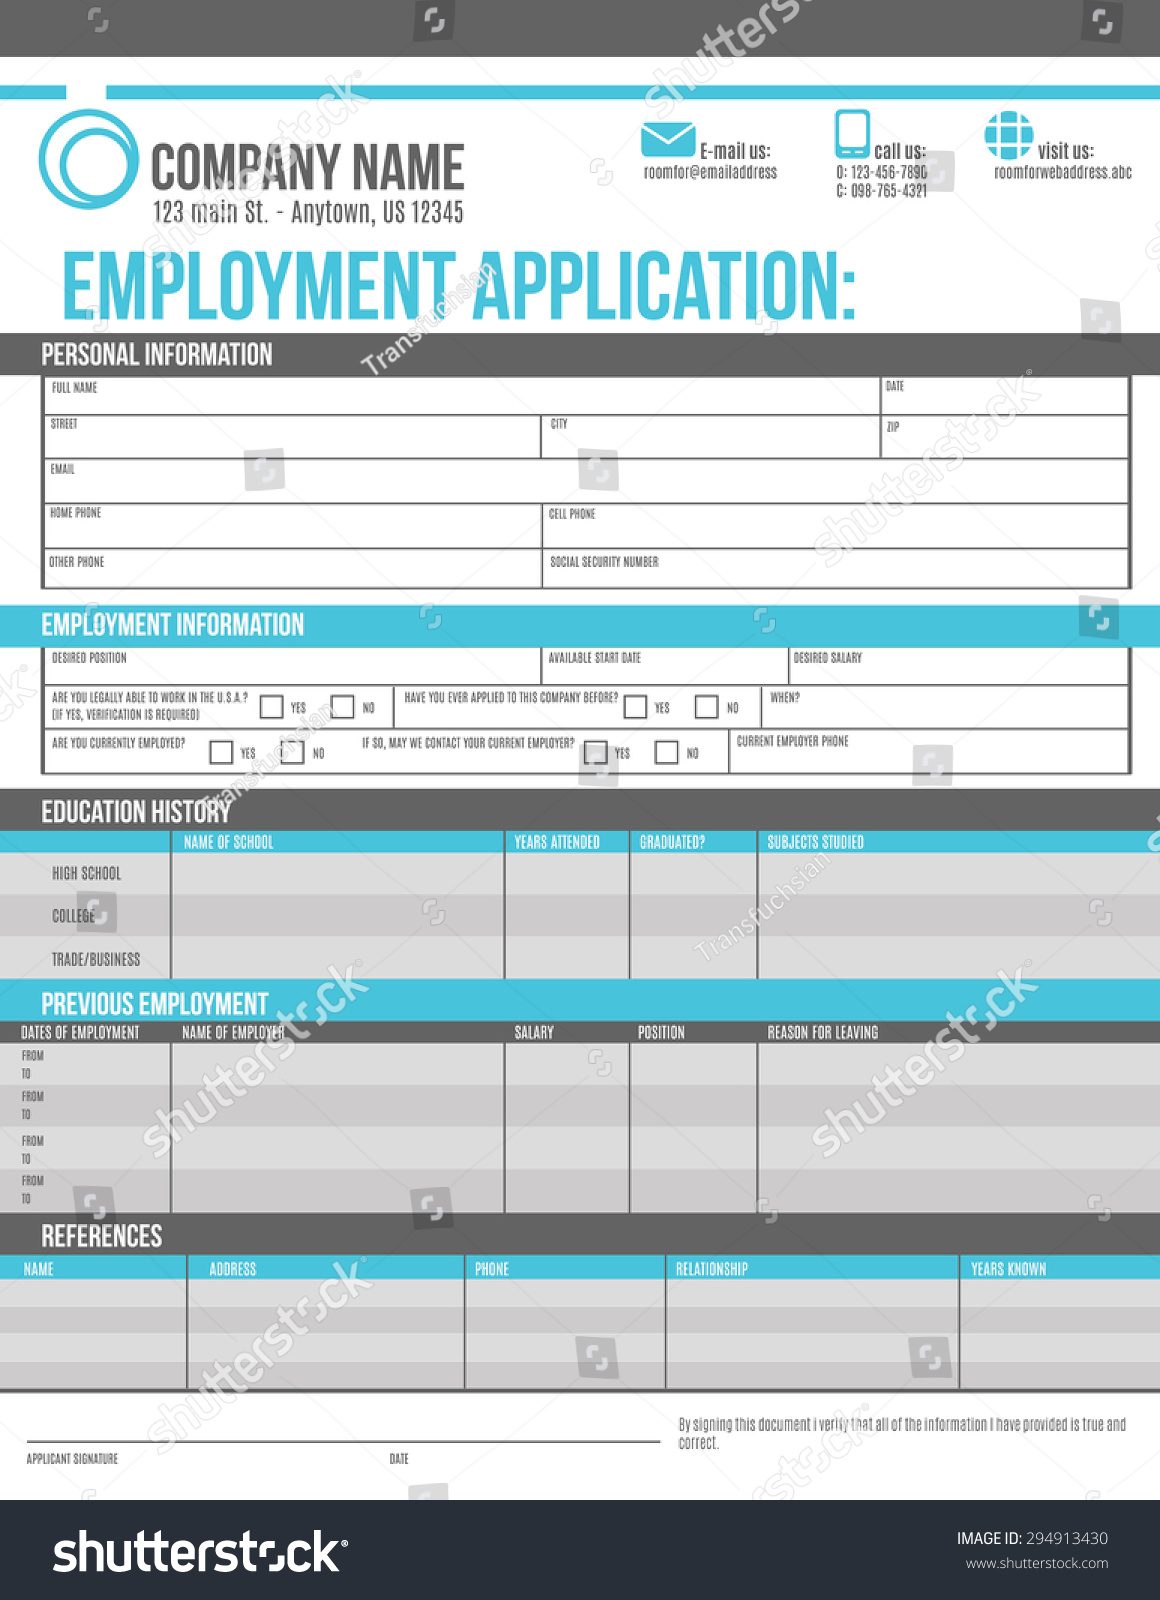 Work Application Template from image.shutterstock.com